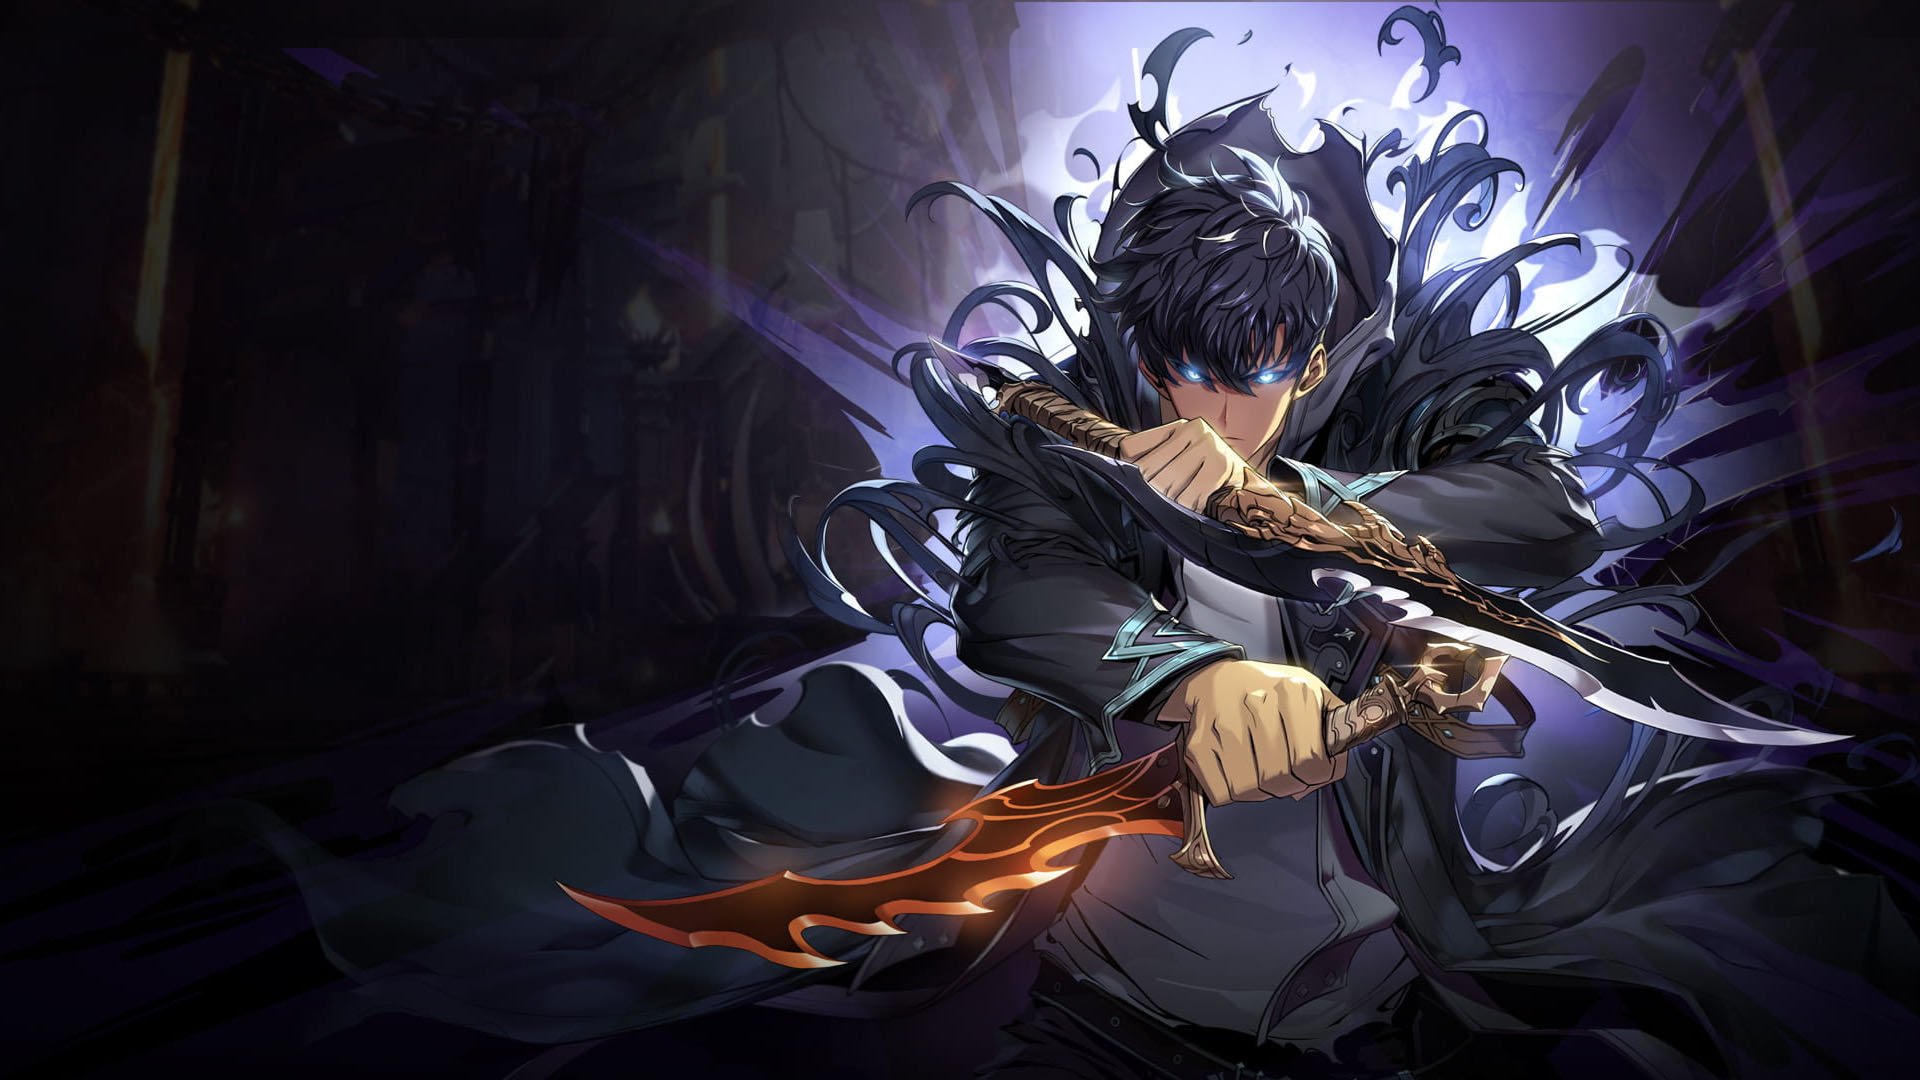 Solo Leveling: Arise is a Fast-Paced Action RPG by Netmarble